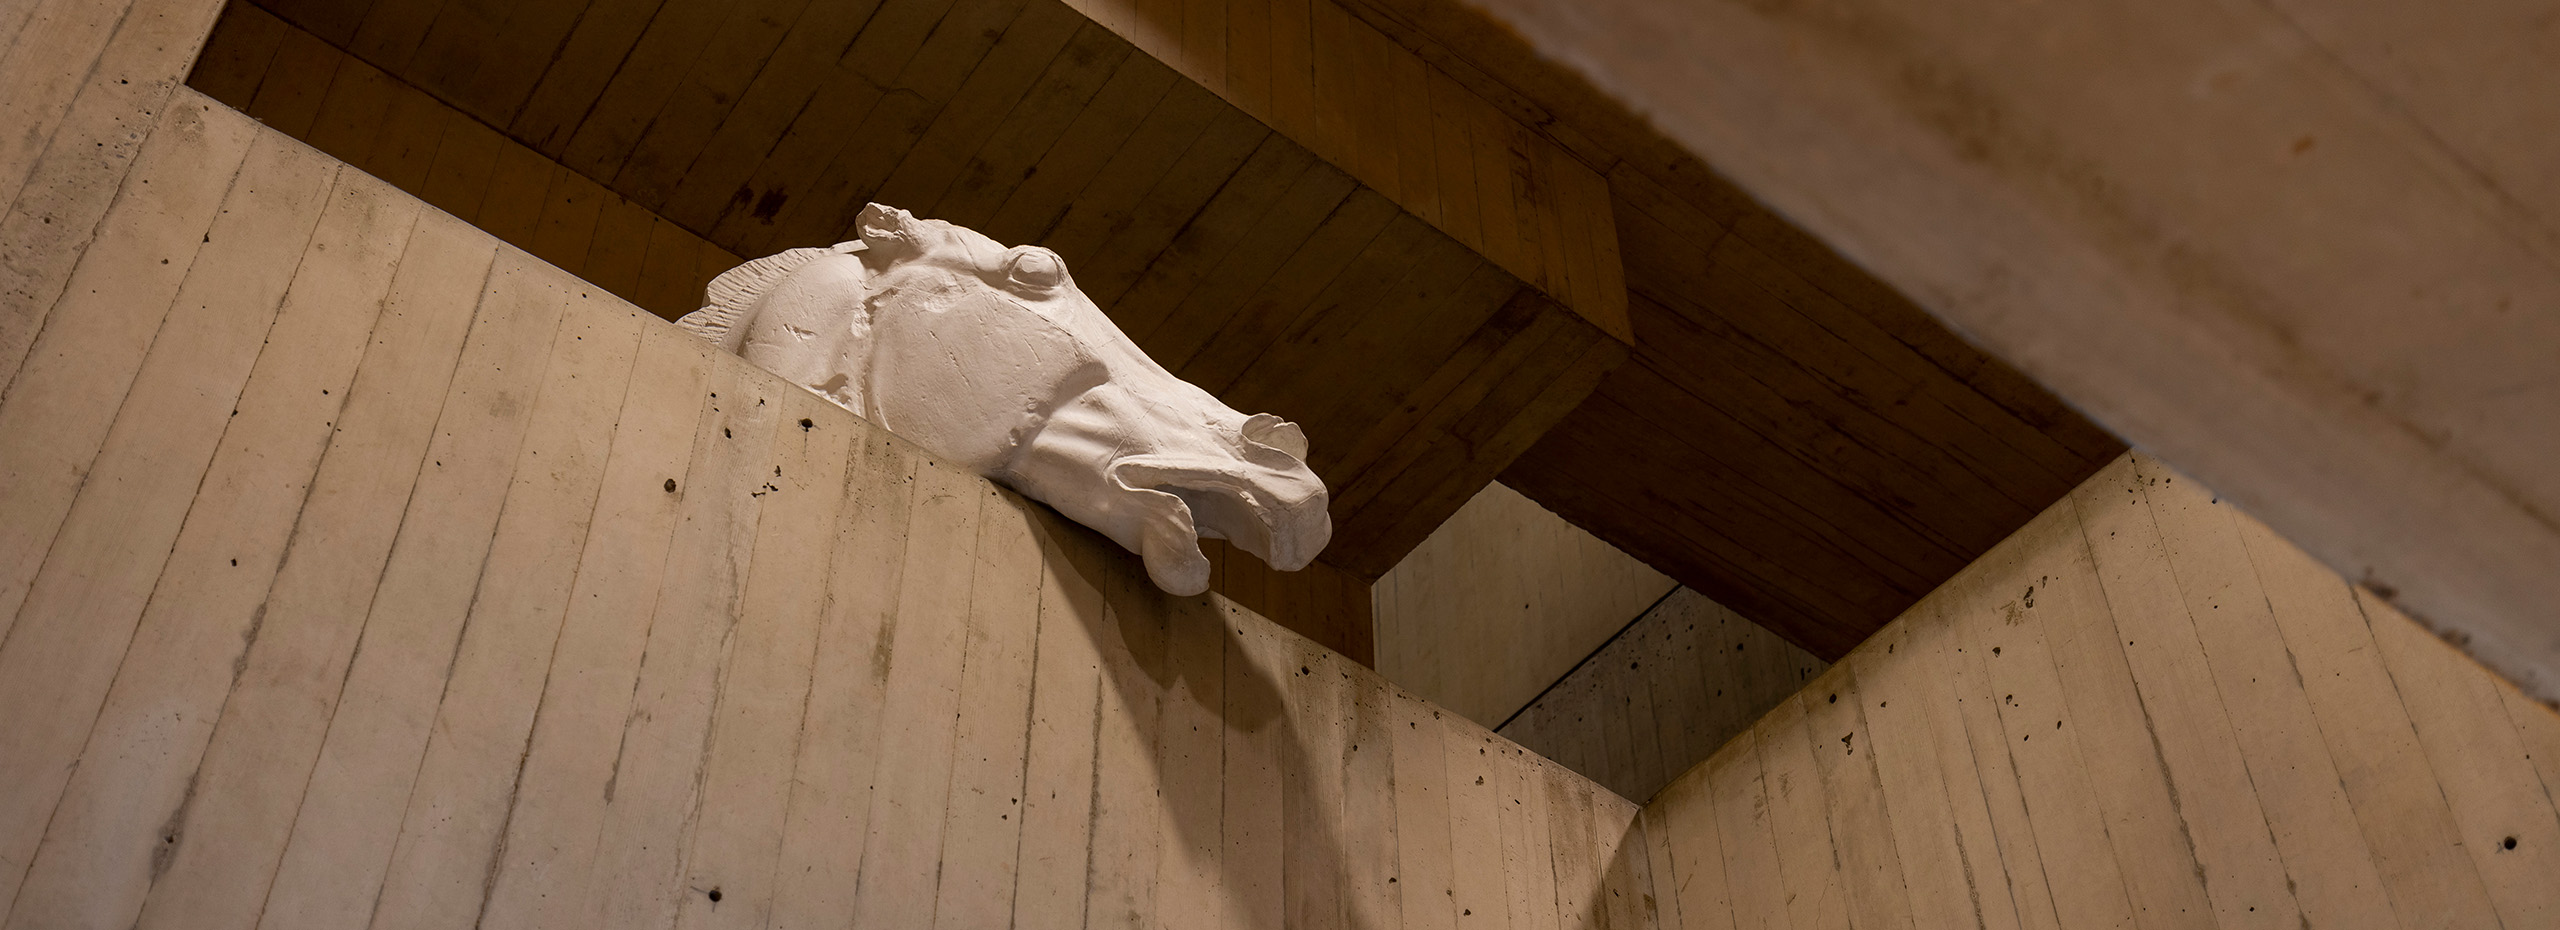 Looking up at a plaster cast of a horse head resting in a concrete museum alcove